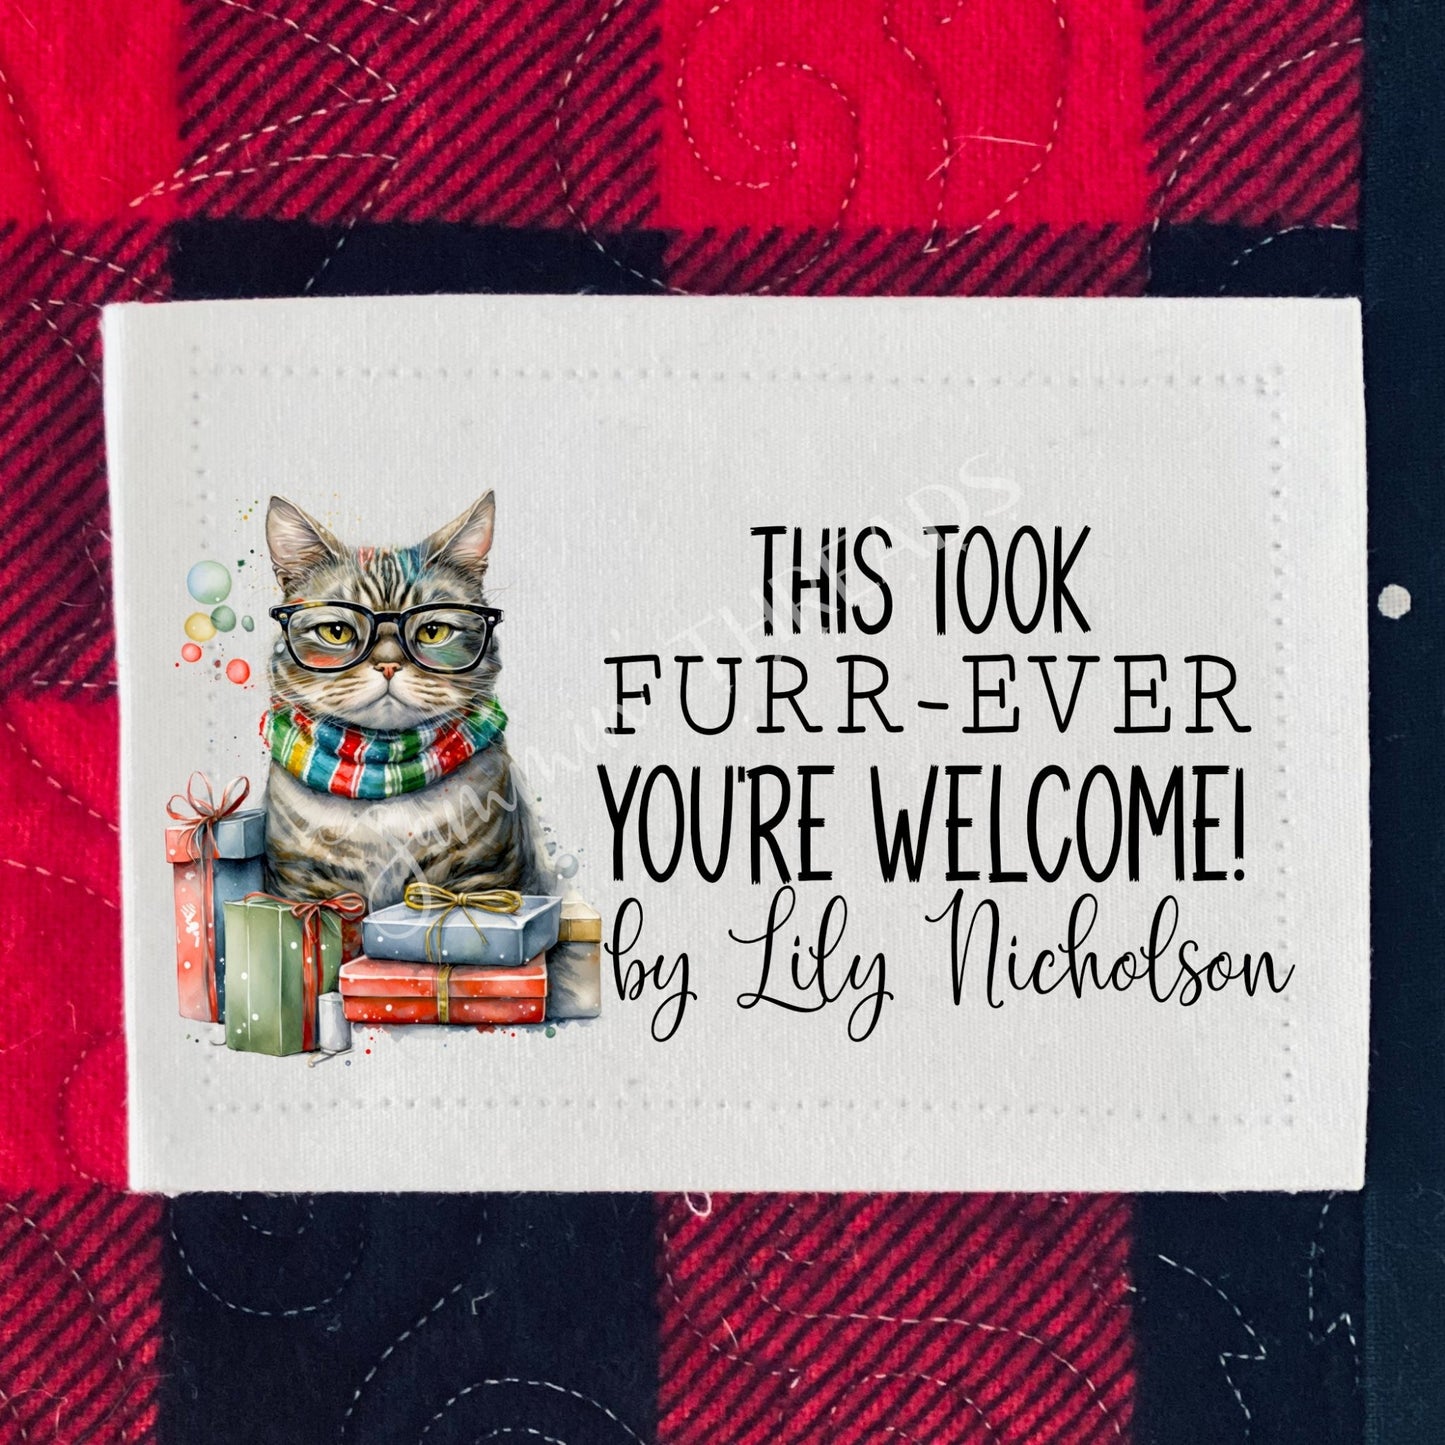 This Took Furrr-ever ~ Christmas, Cat Quilt Labels - Jammin Threads